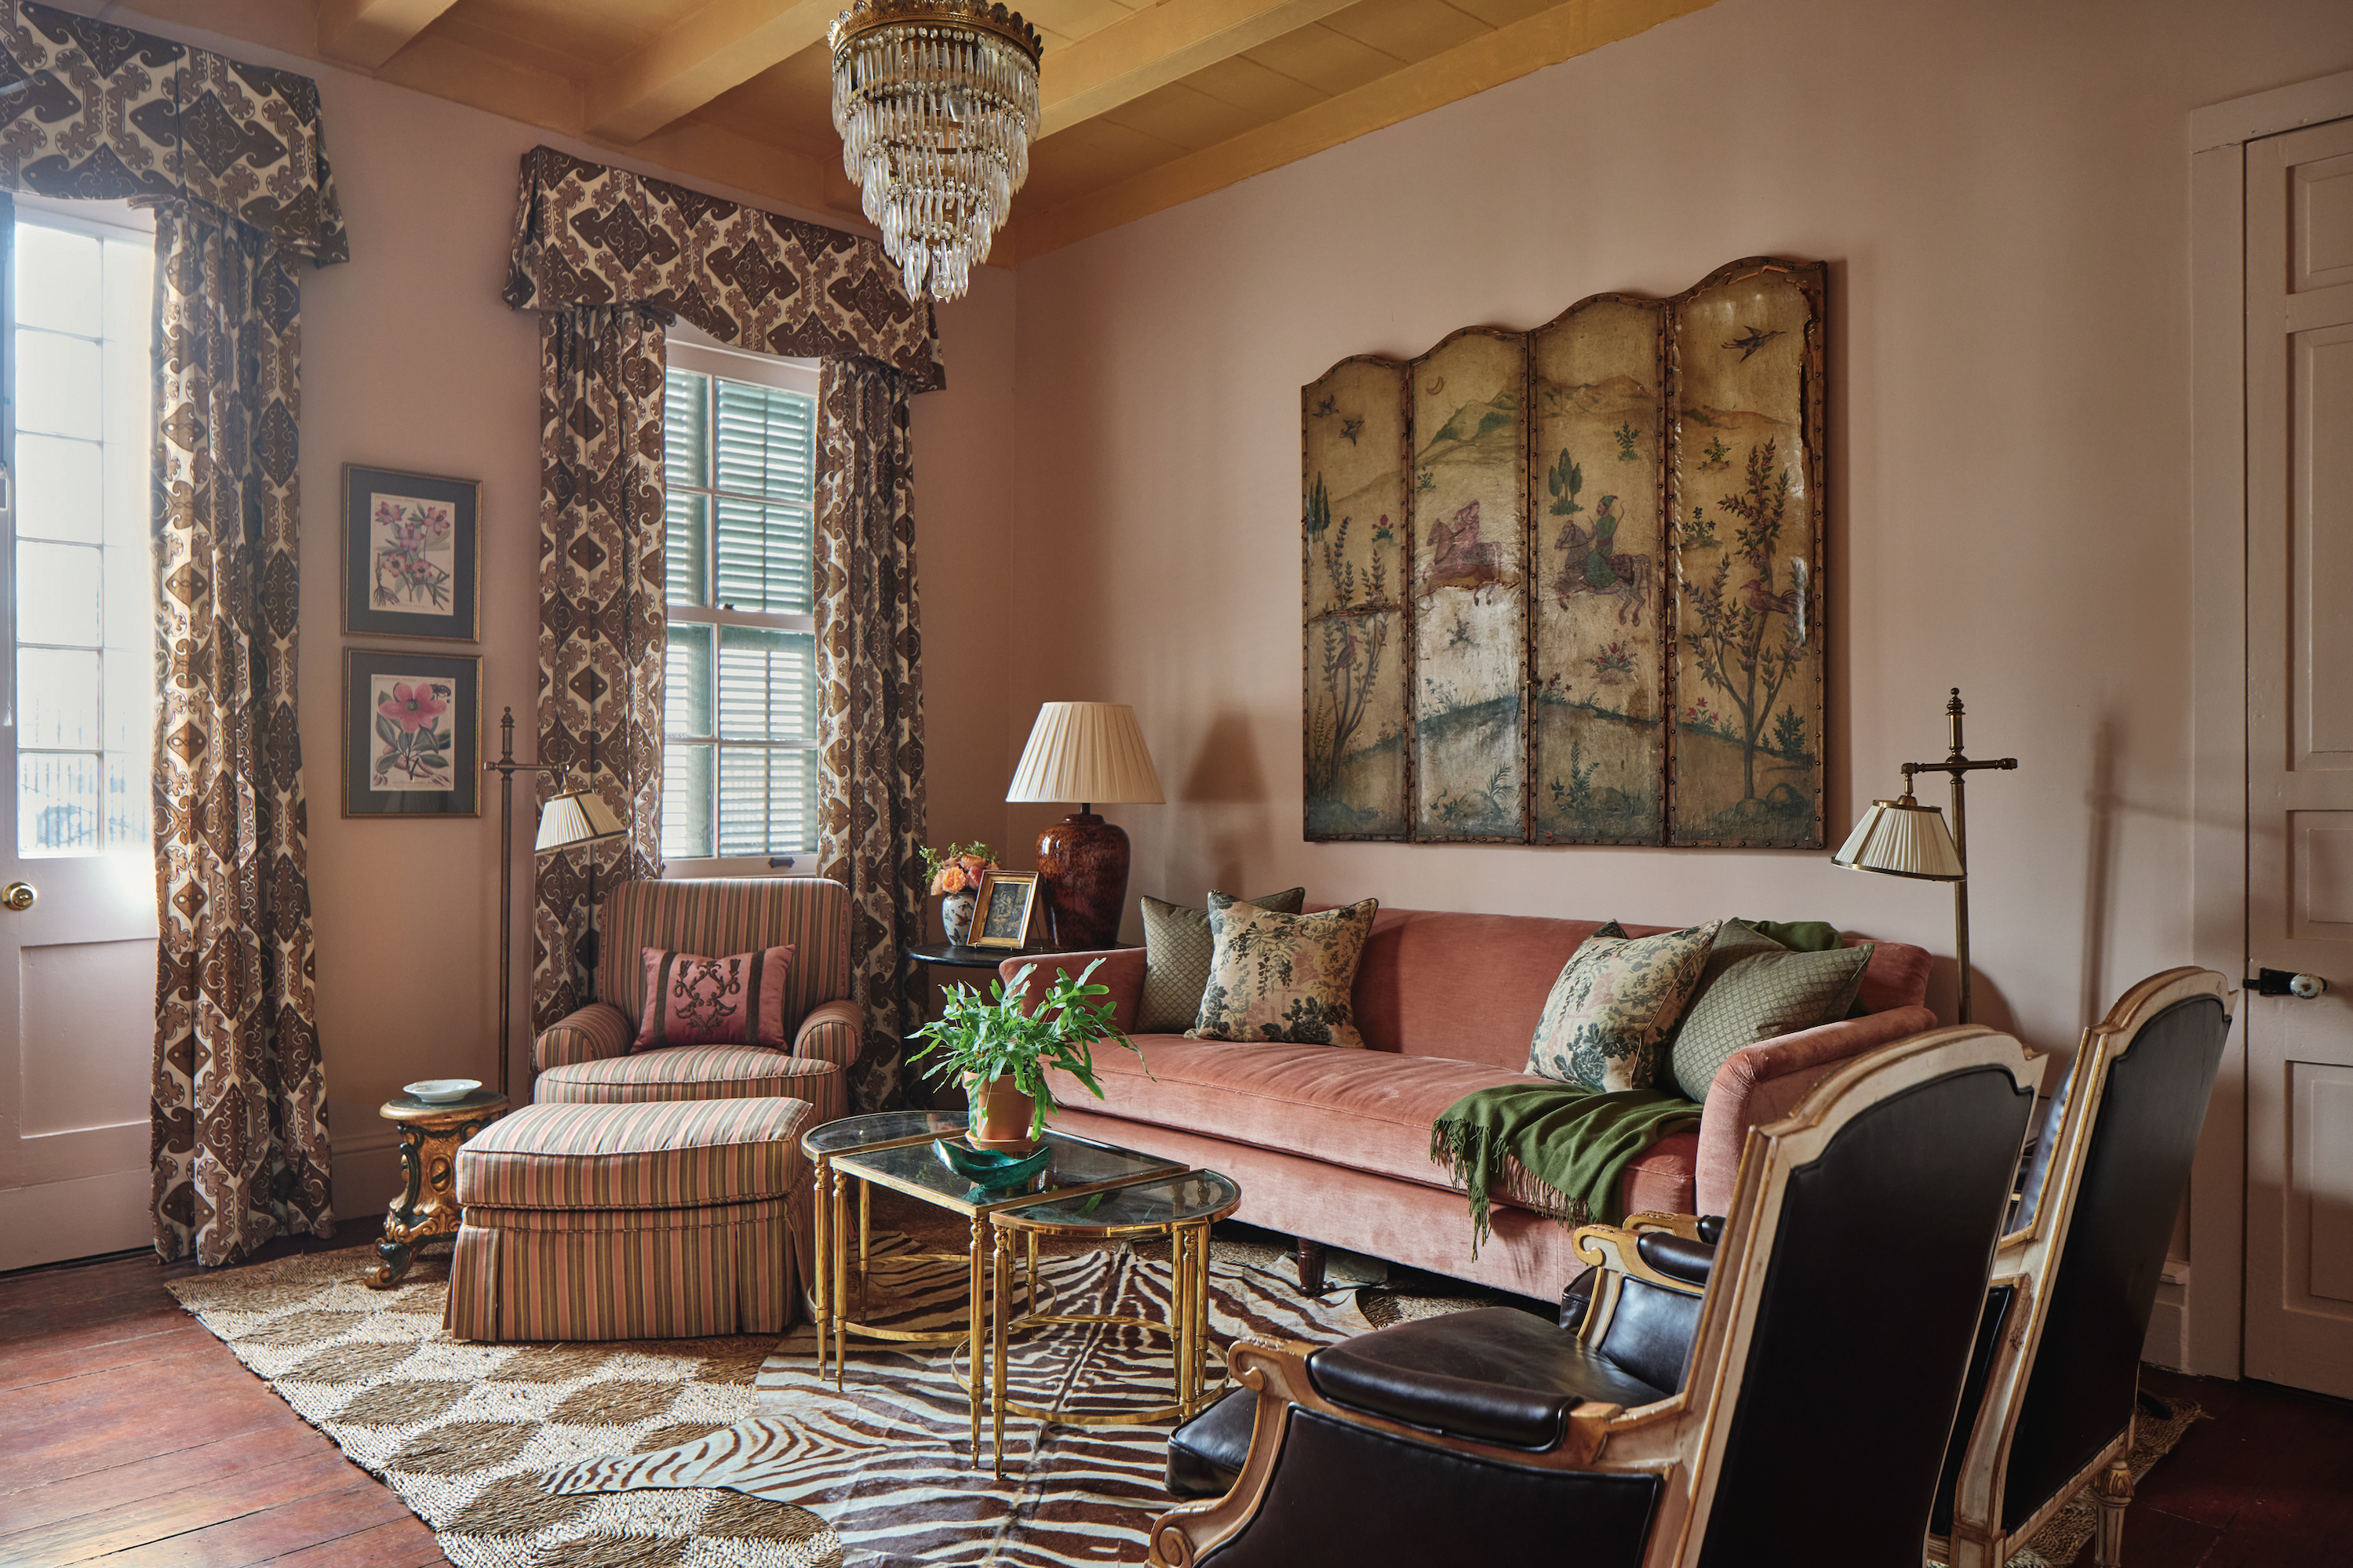 A pink living room with a tiered crystal chandelier, a painted leather screen, a velvet pink sofa, and chairs on a patterned diamond rug